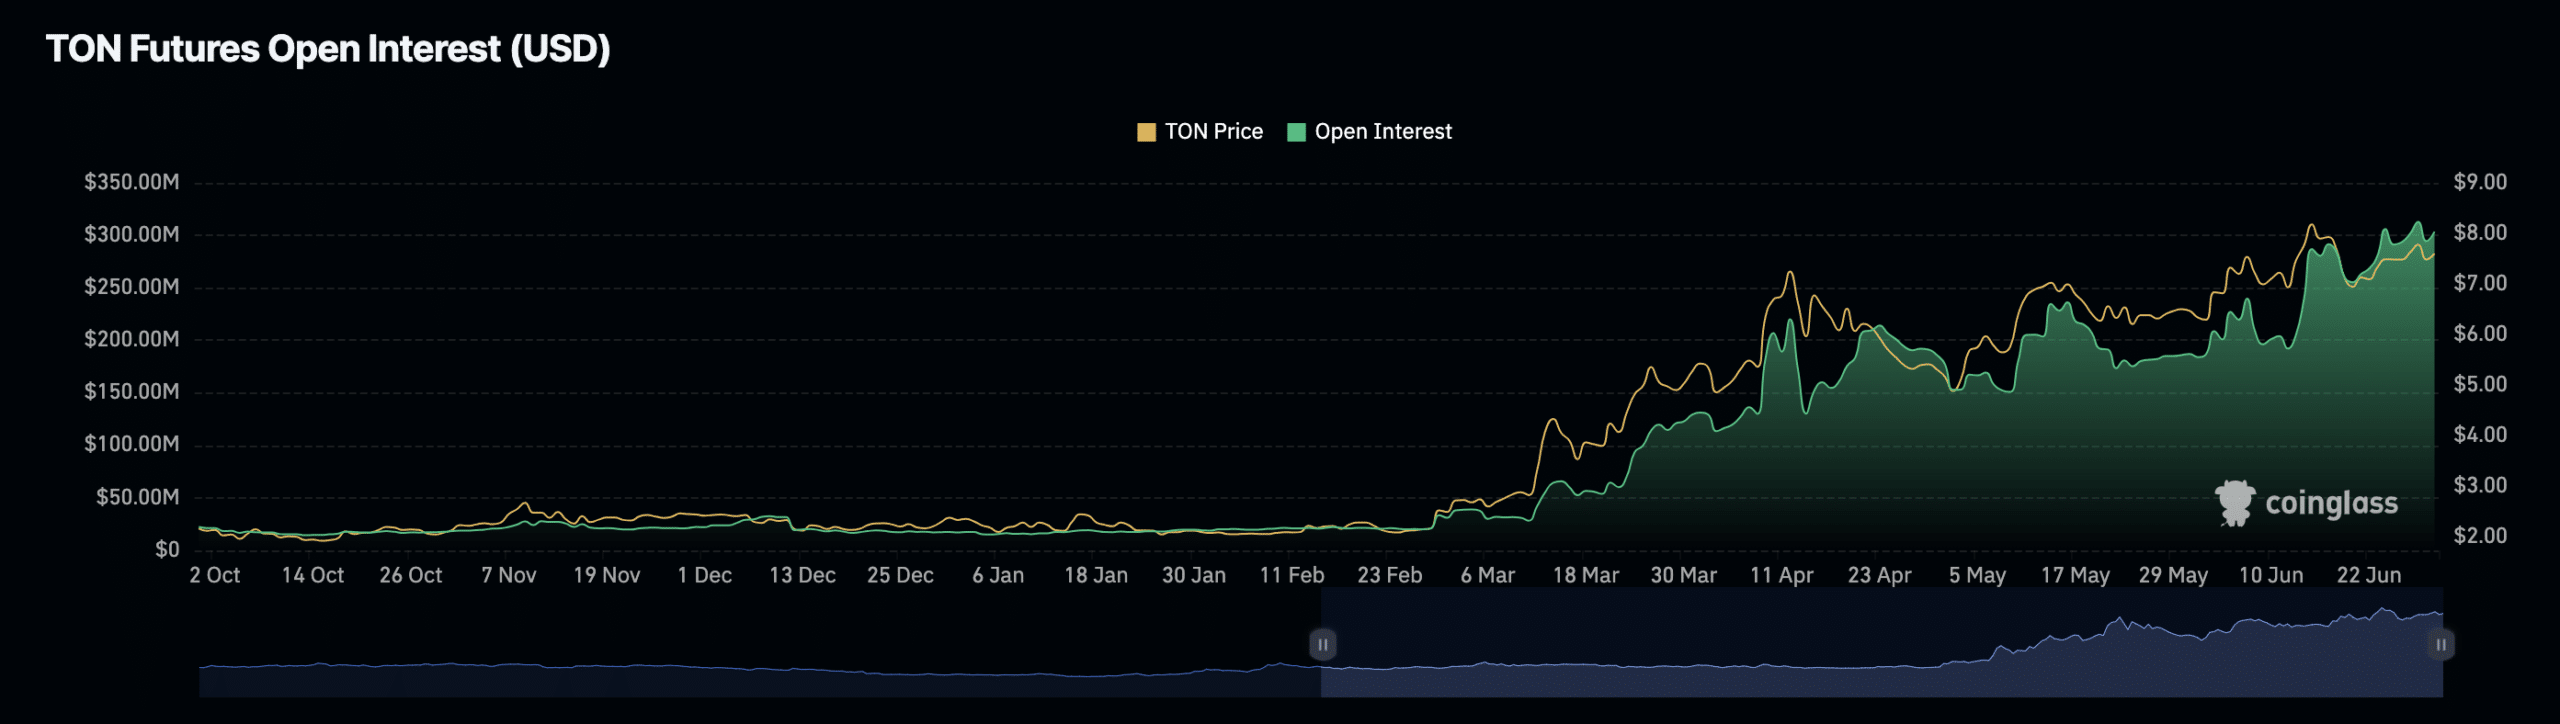 Speculative activity at Toncoin is increasing